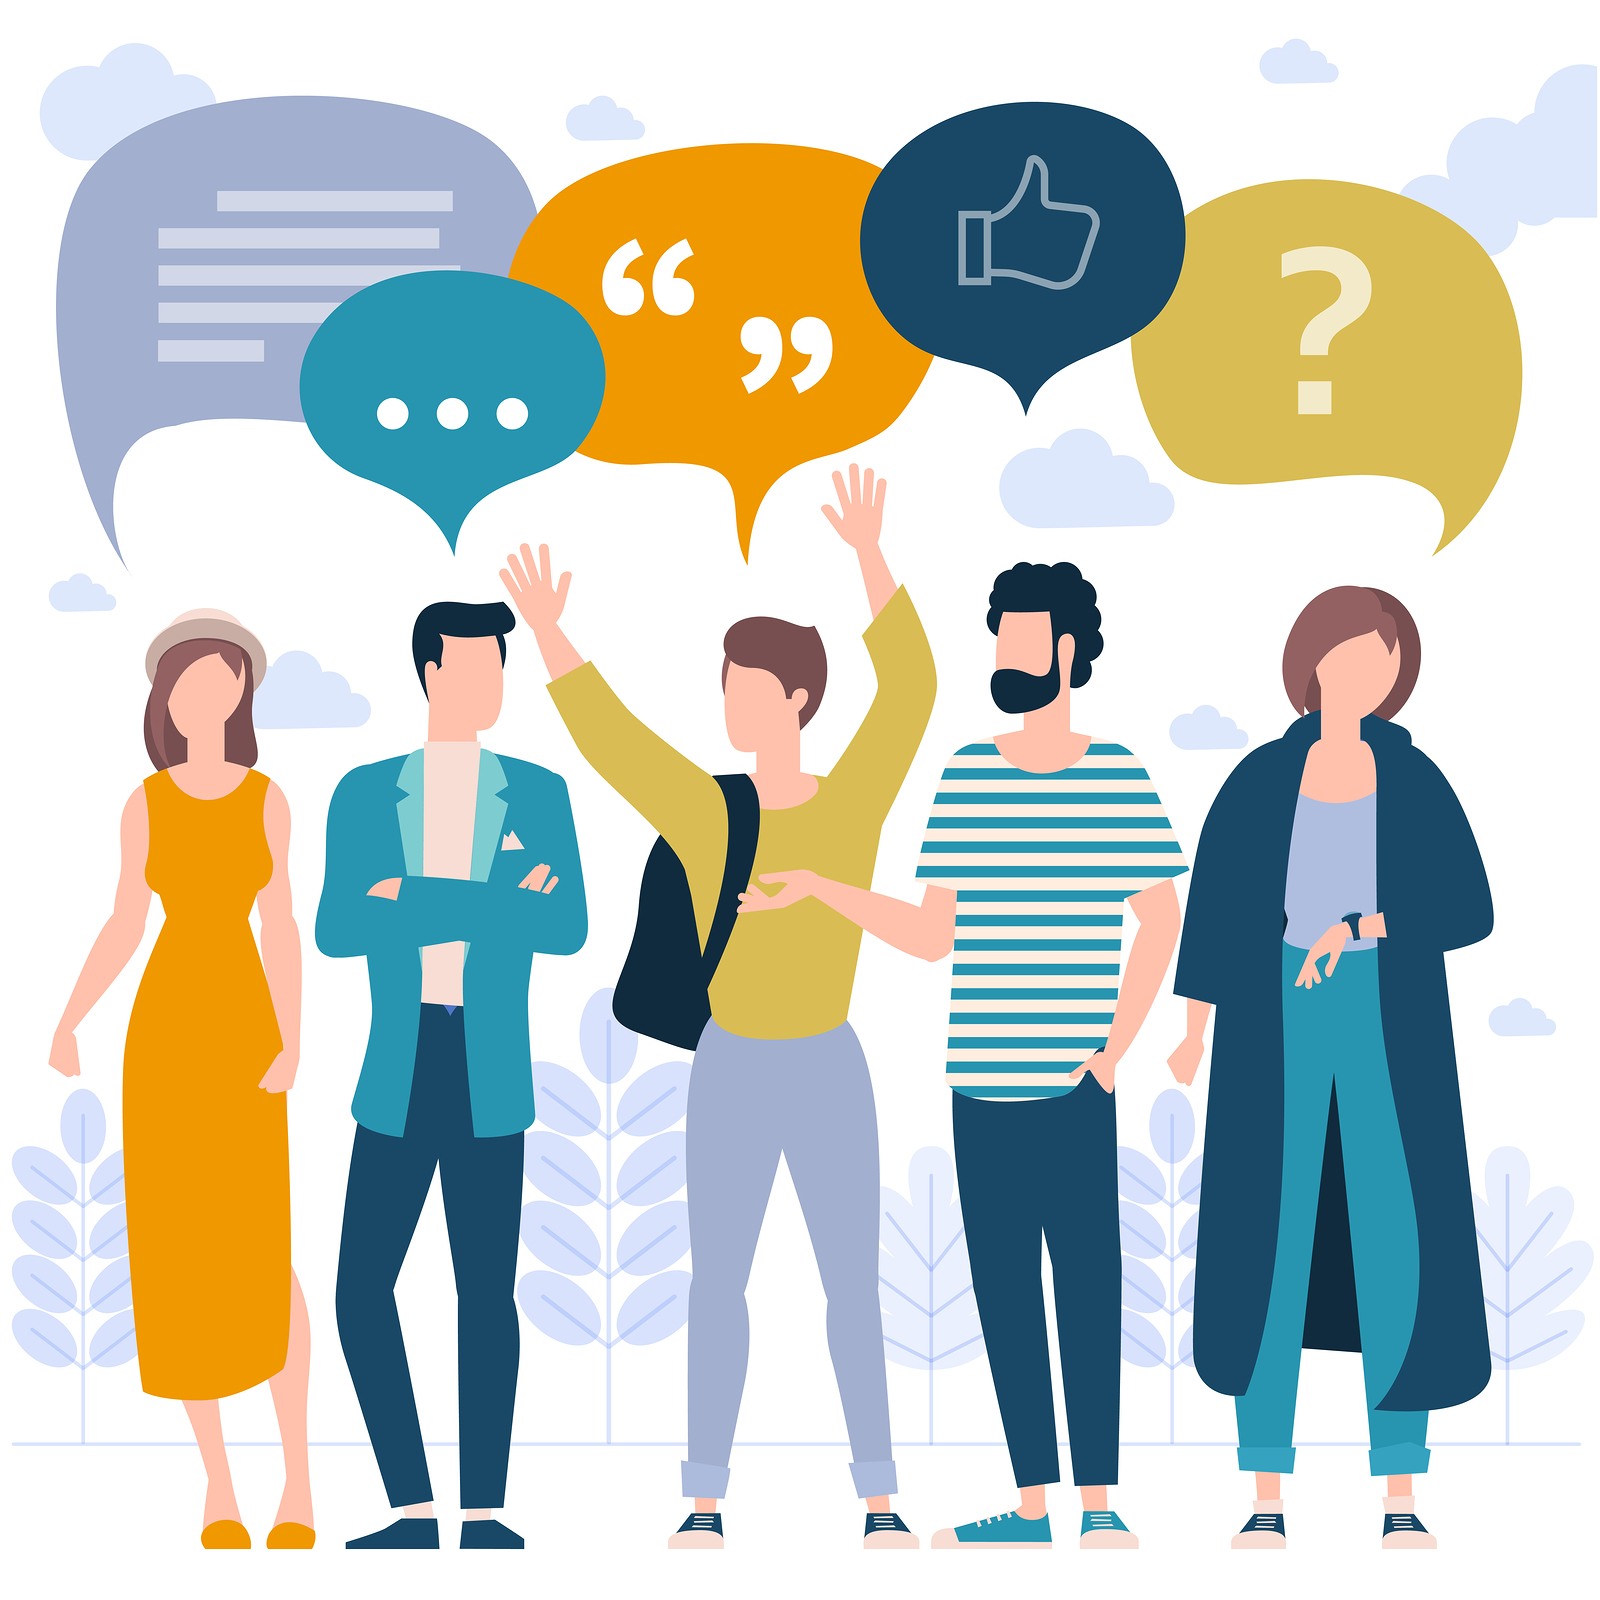 Flat design trendy color vector people with blank speech bubbles. Different characters, styles and professions, standing together diverse acting poses collection.